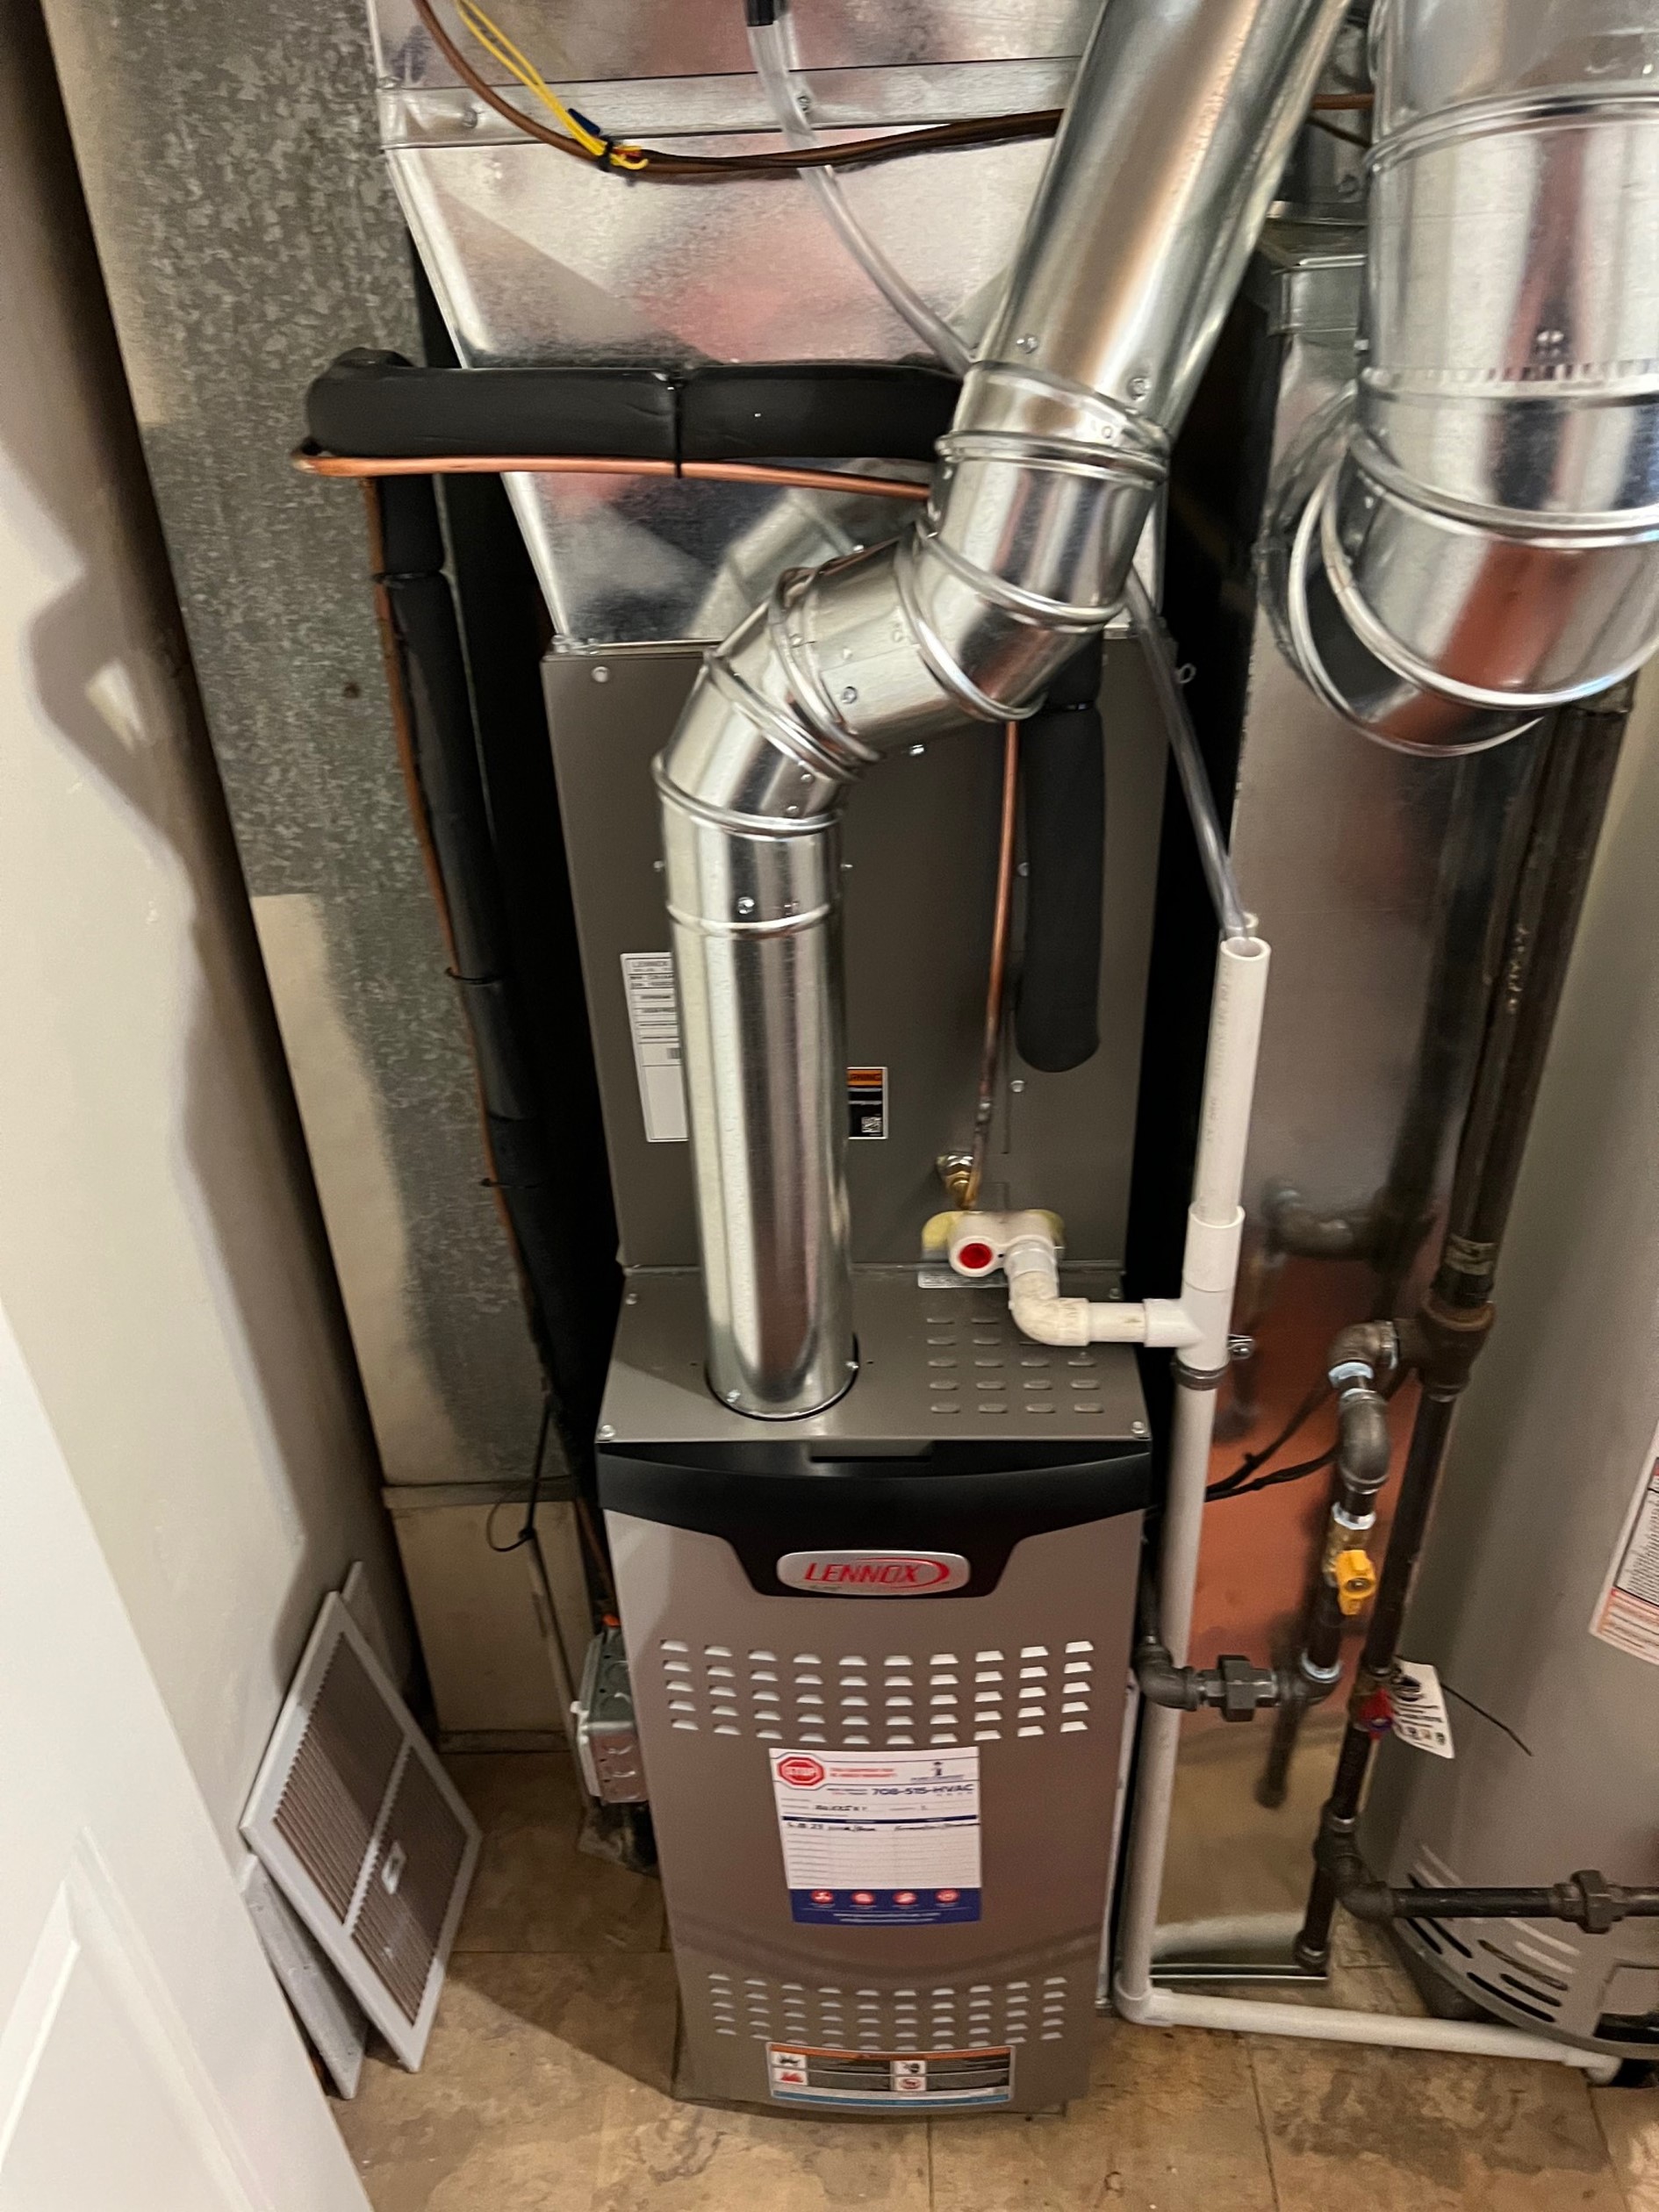 When it's time for a new furnace, Pure Comfort Heating and Air Conditioning provides professional furnace installation services. Our experts will help you choose the right unit for your home.